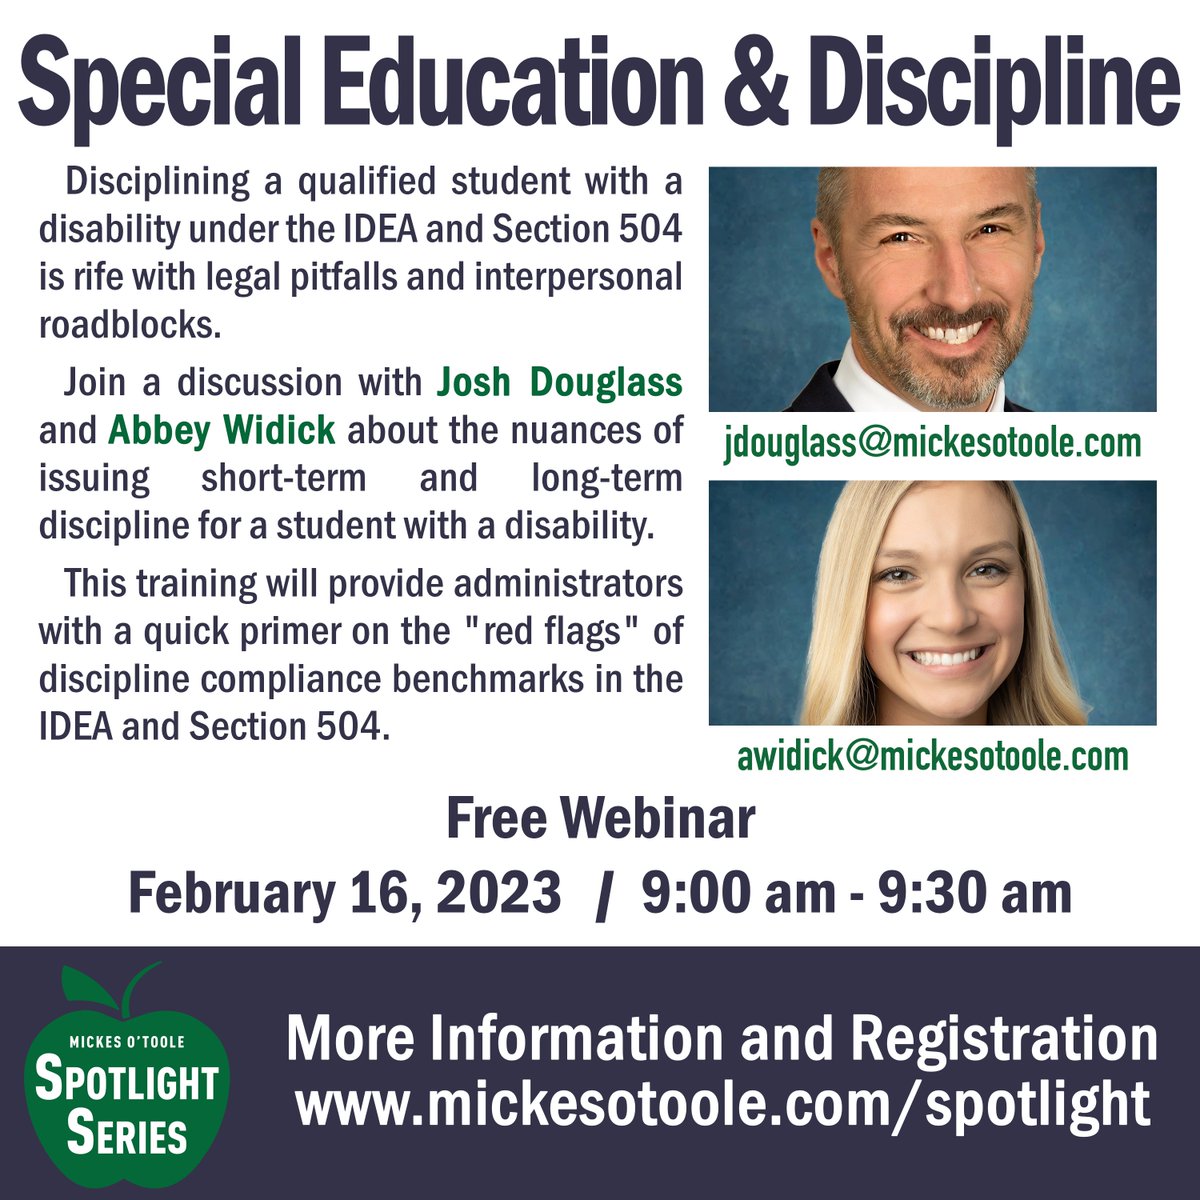 Join Josh Douglass & Abbey Widick for a free 30-min webinar on Feb 16 about disciplining students with disabilities under the #IDEA & #Section504. Learn about key compliance benchmarks and discipline strategies.

Register: mickesotoole.com/spotlight

#SPED #EducationLaw